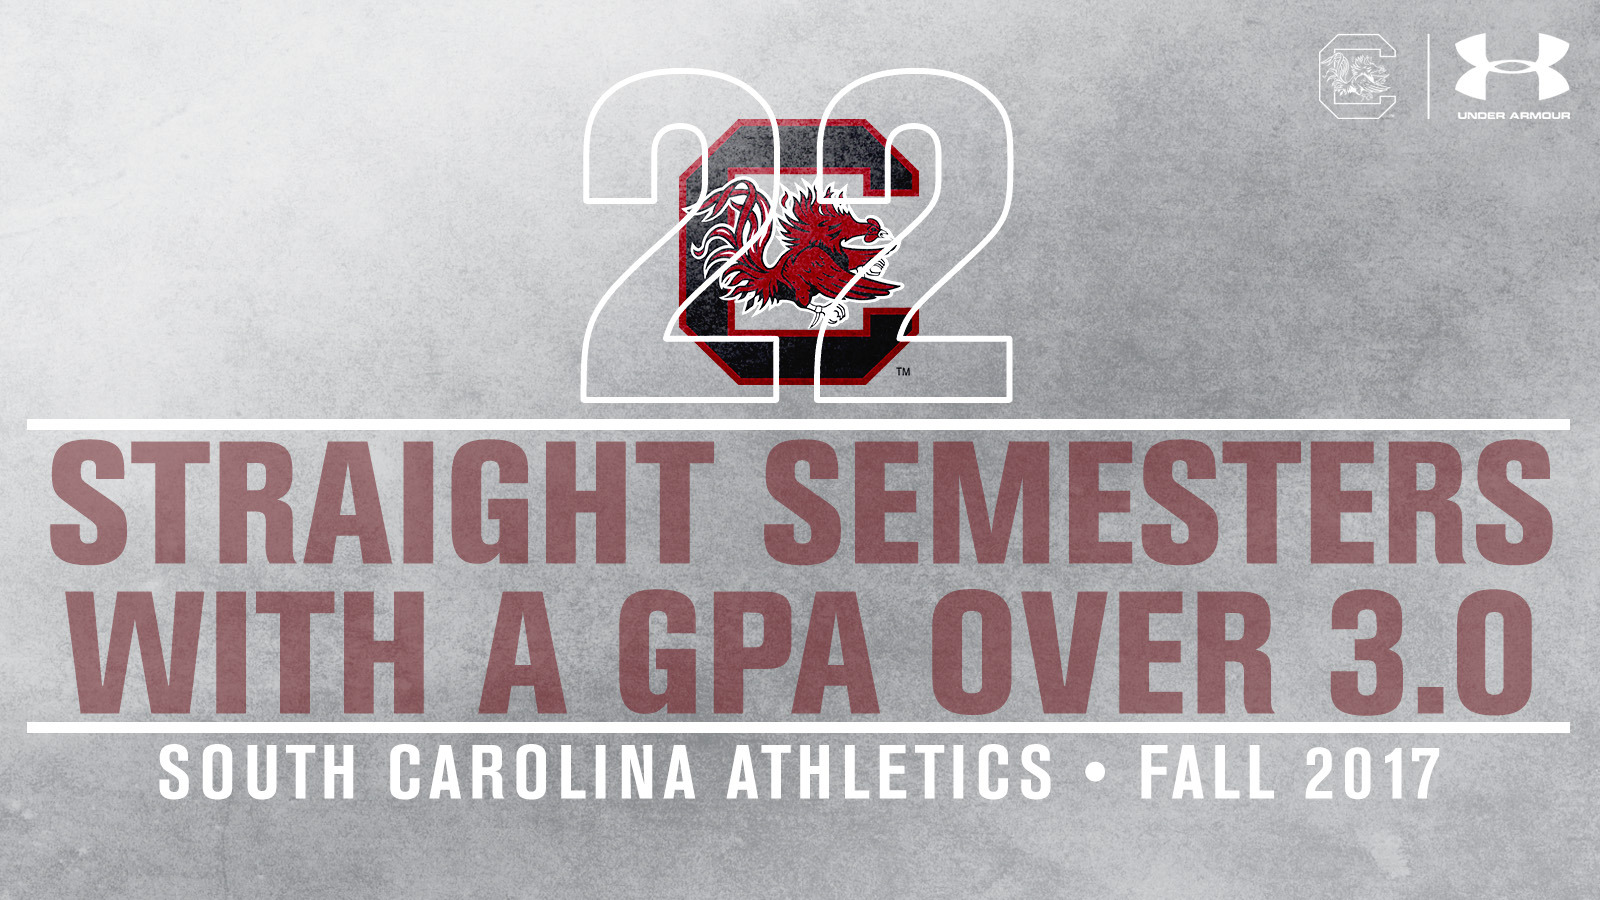 Gamecocks Make It 22-Straight Semesters of 3.0 GPA in the Classroom